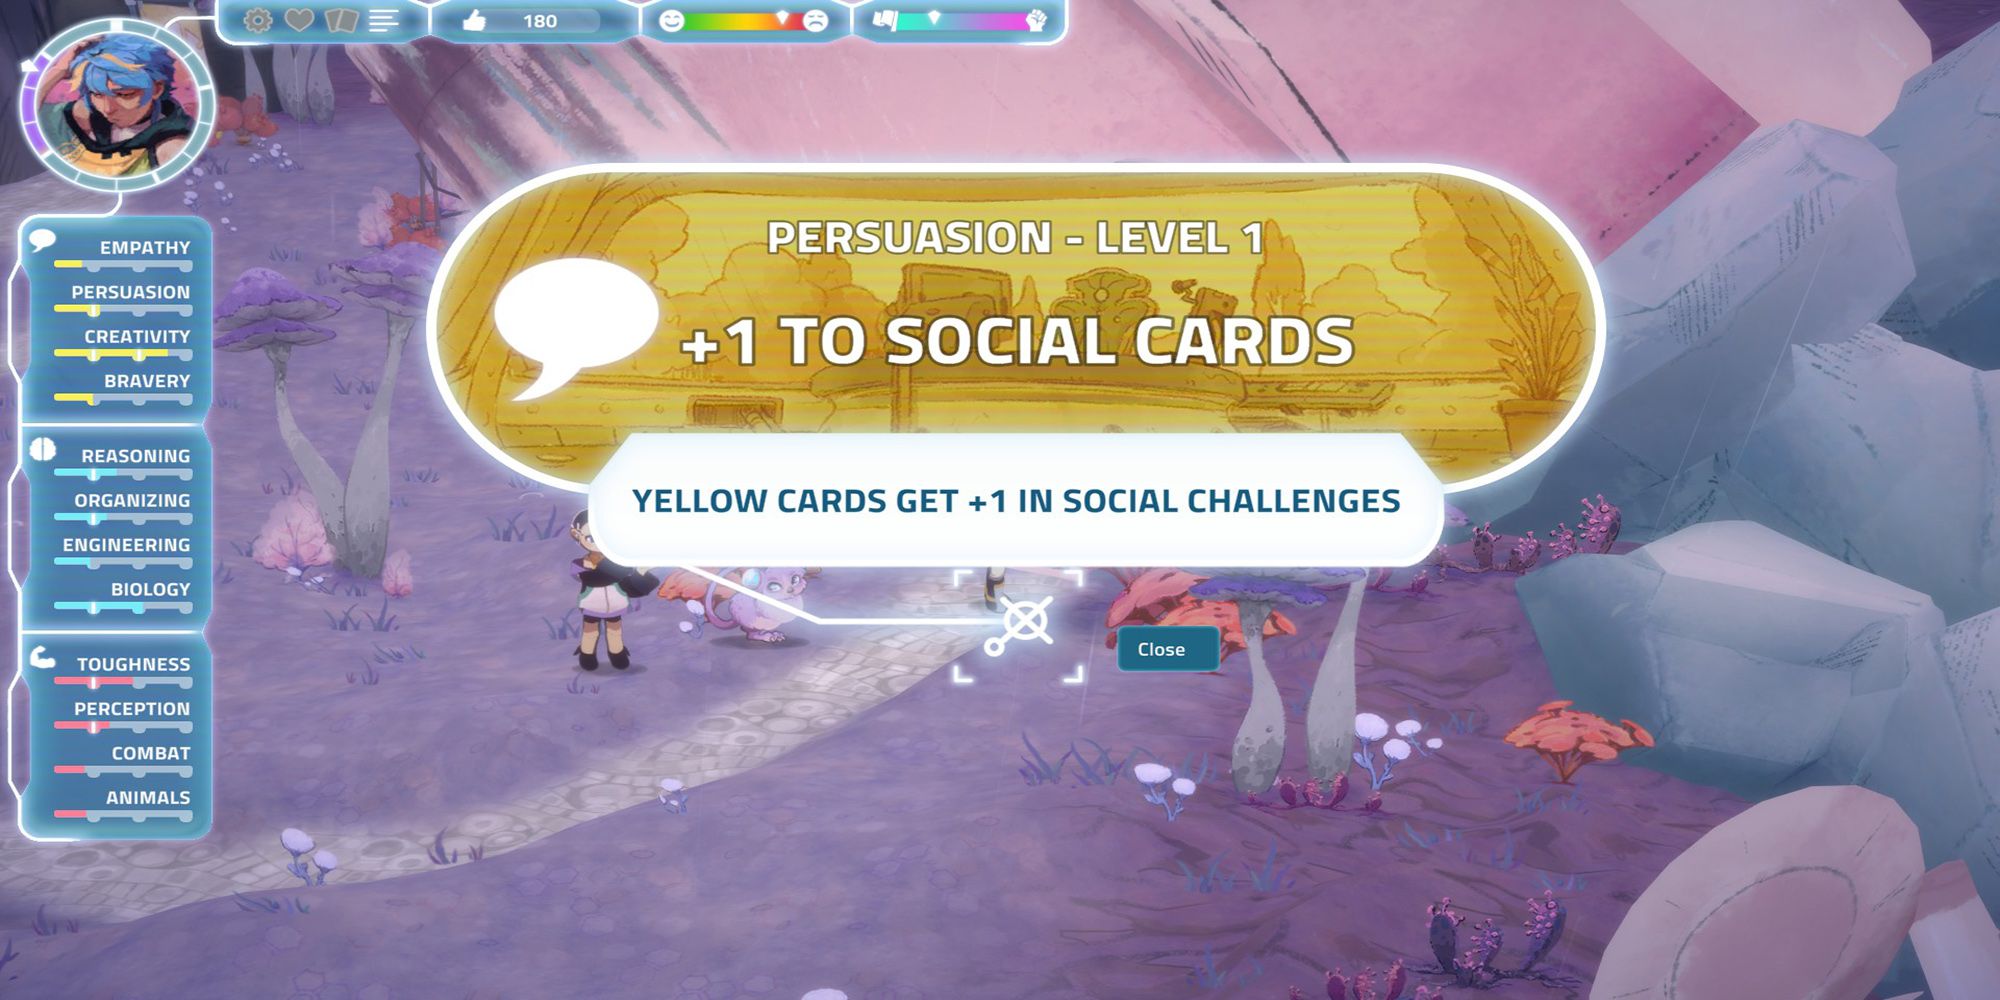 The Level 1 Persuasion Perk grants +1 to yellow cards in social challenges in I Was A Teenage Exocolonist.